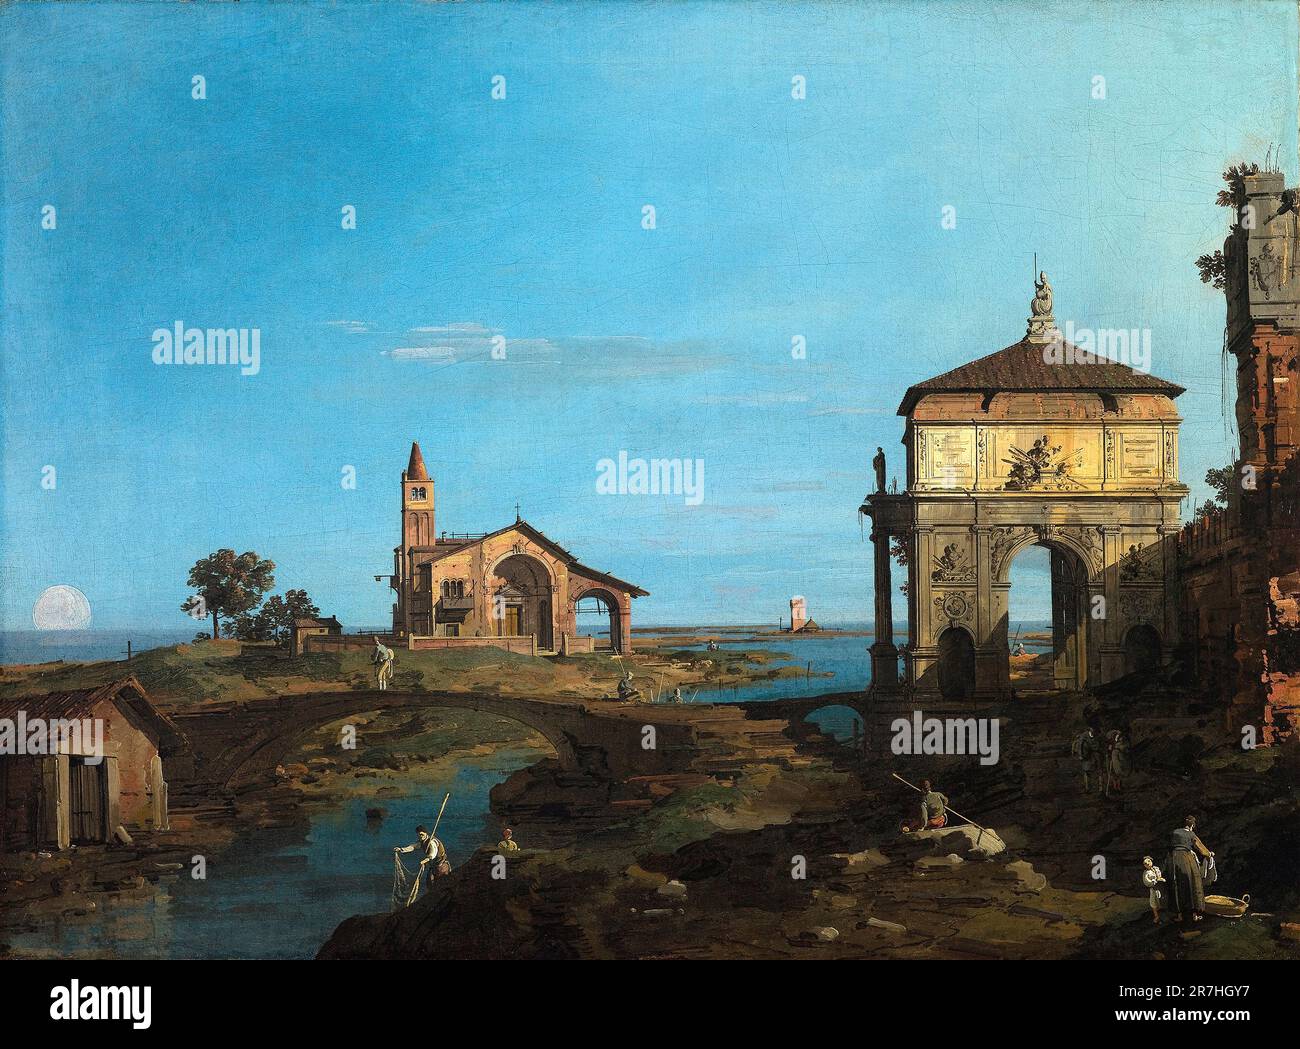 An Island in the Lagoon with a Gateway and a Church painted by the Venetian painter Giovanni Antonio Canal, commonly known as Canaletto, in 1743–44. Canaletto specialised in realsitic city scenes (called Verduti) but occasionally he painted from his imagination, which he called Capriccio Stock Photo